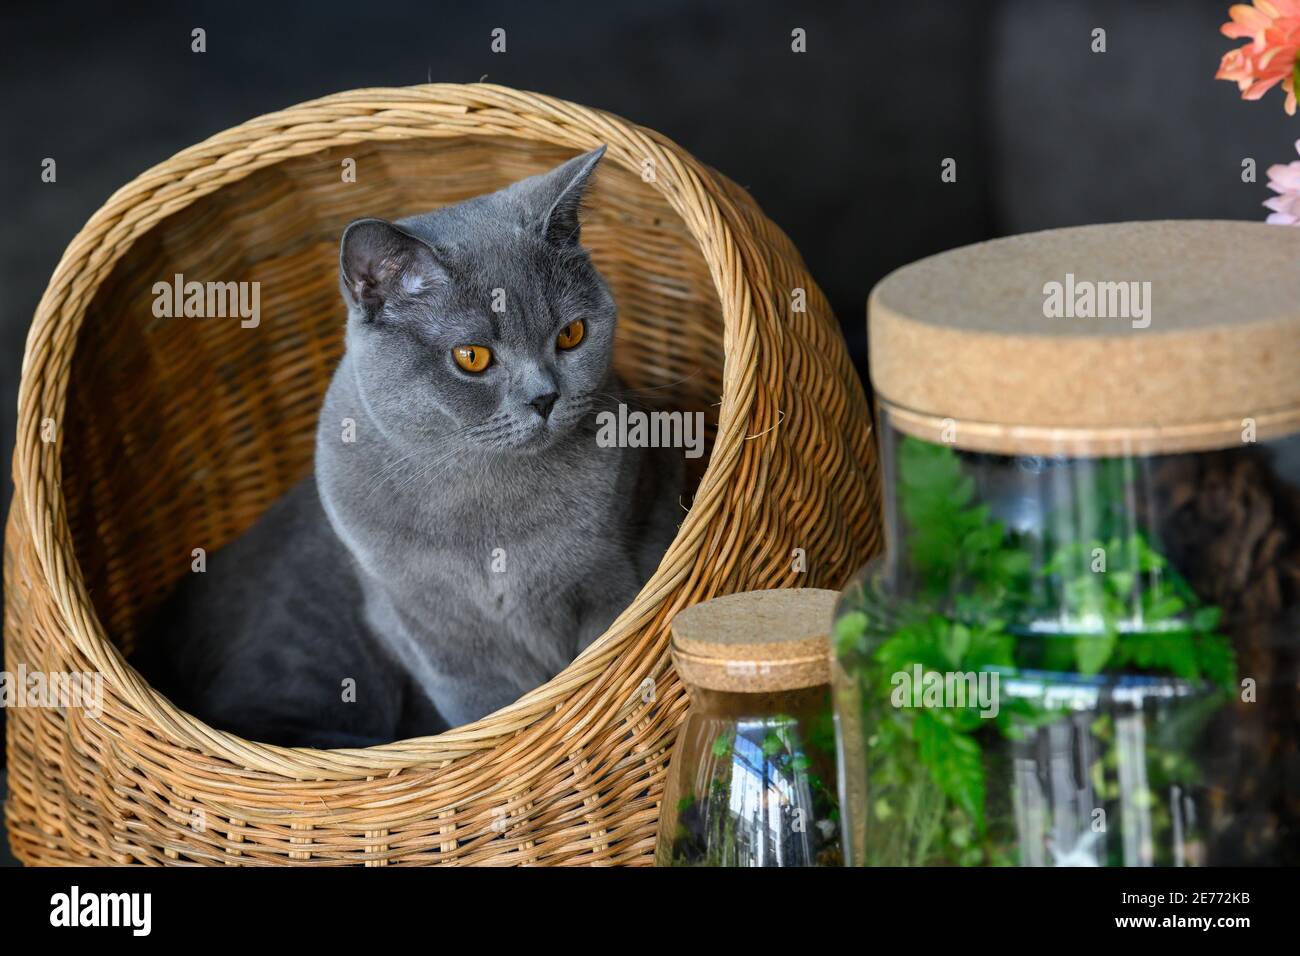 British shorthair blue-grey color sitting in a rattan basket and looked at the glass jar of the Little Forest Terrarium. Stock Photo